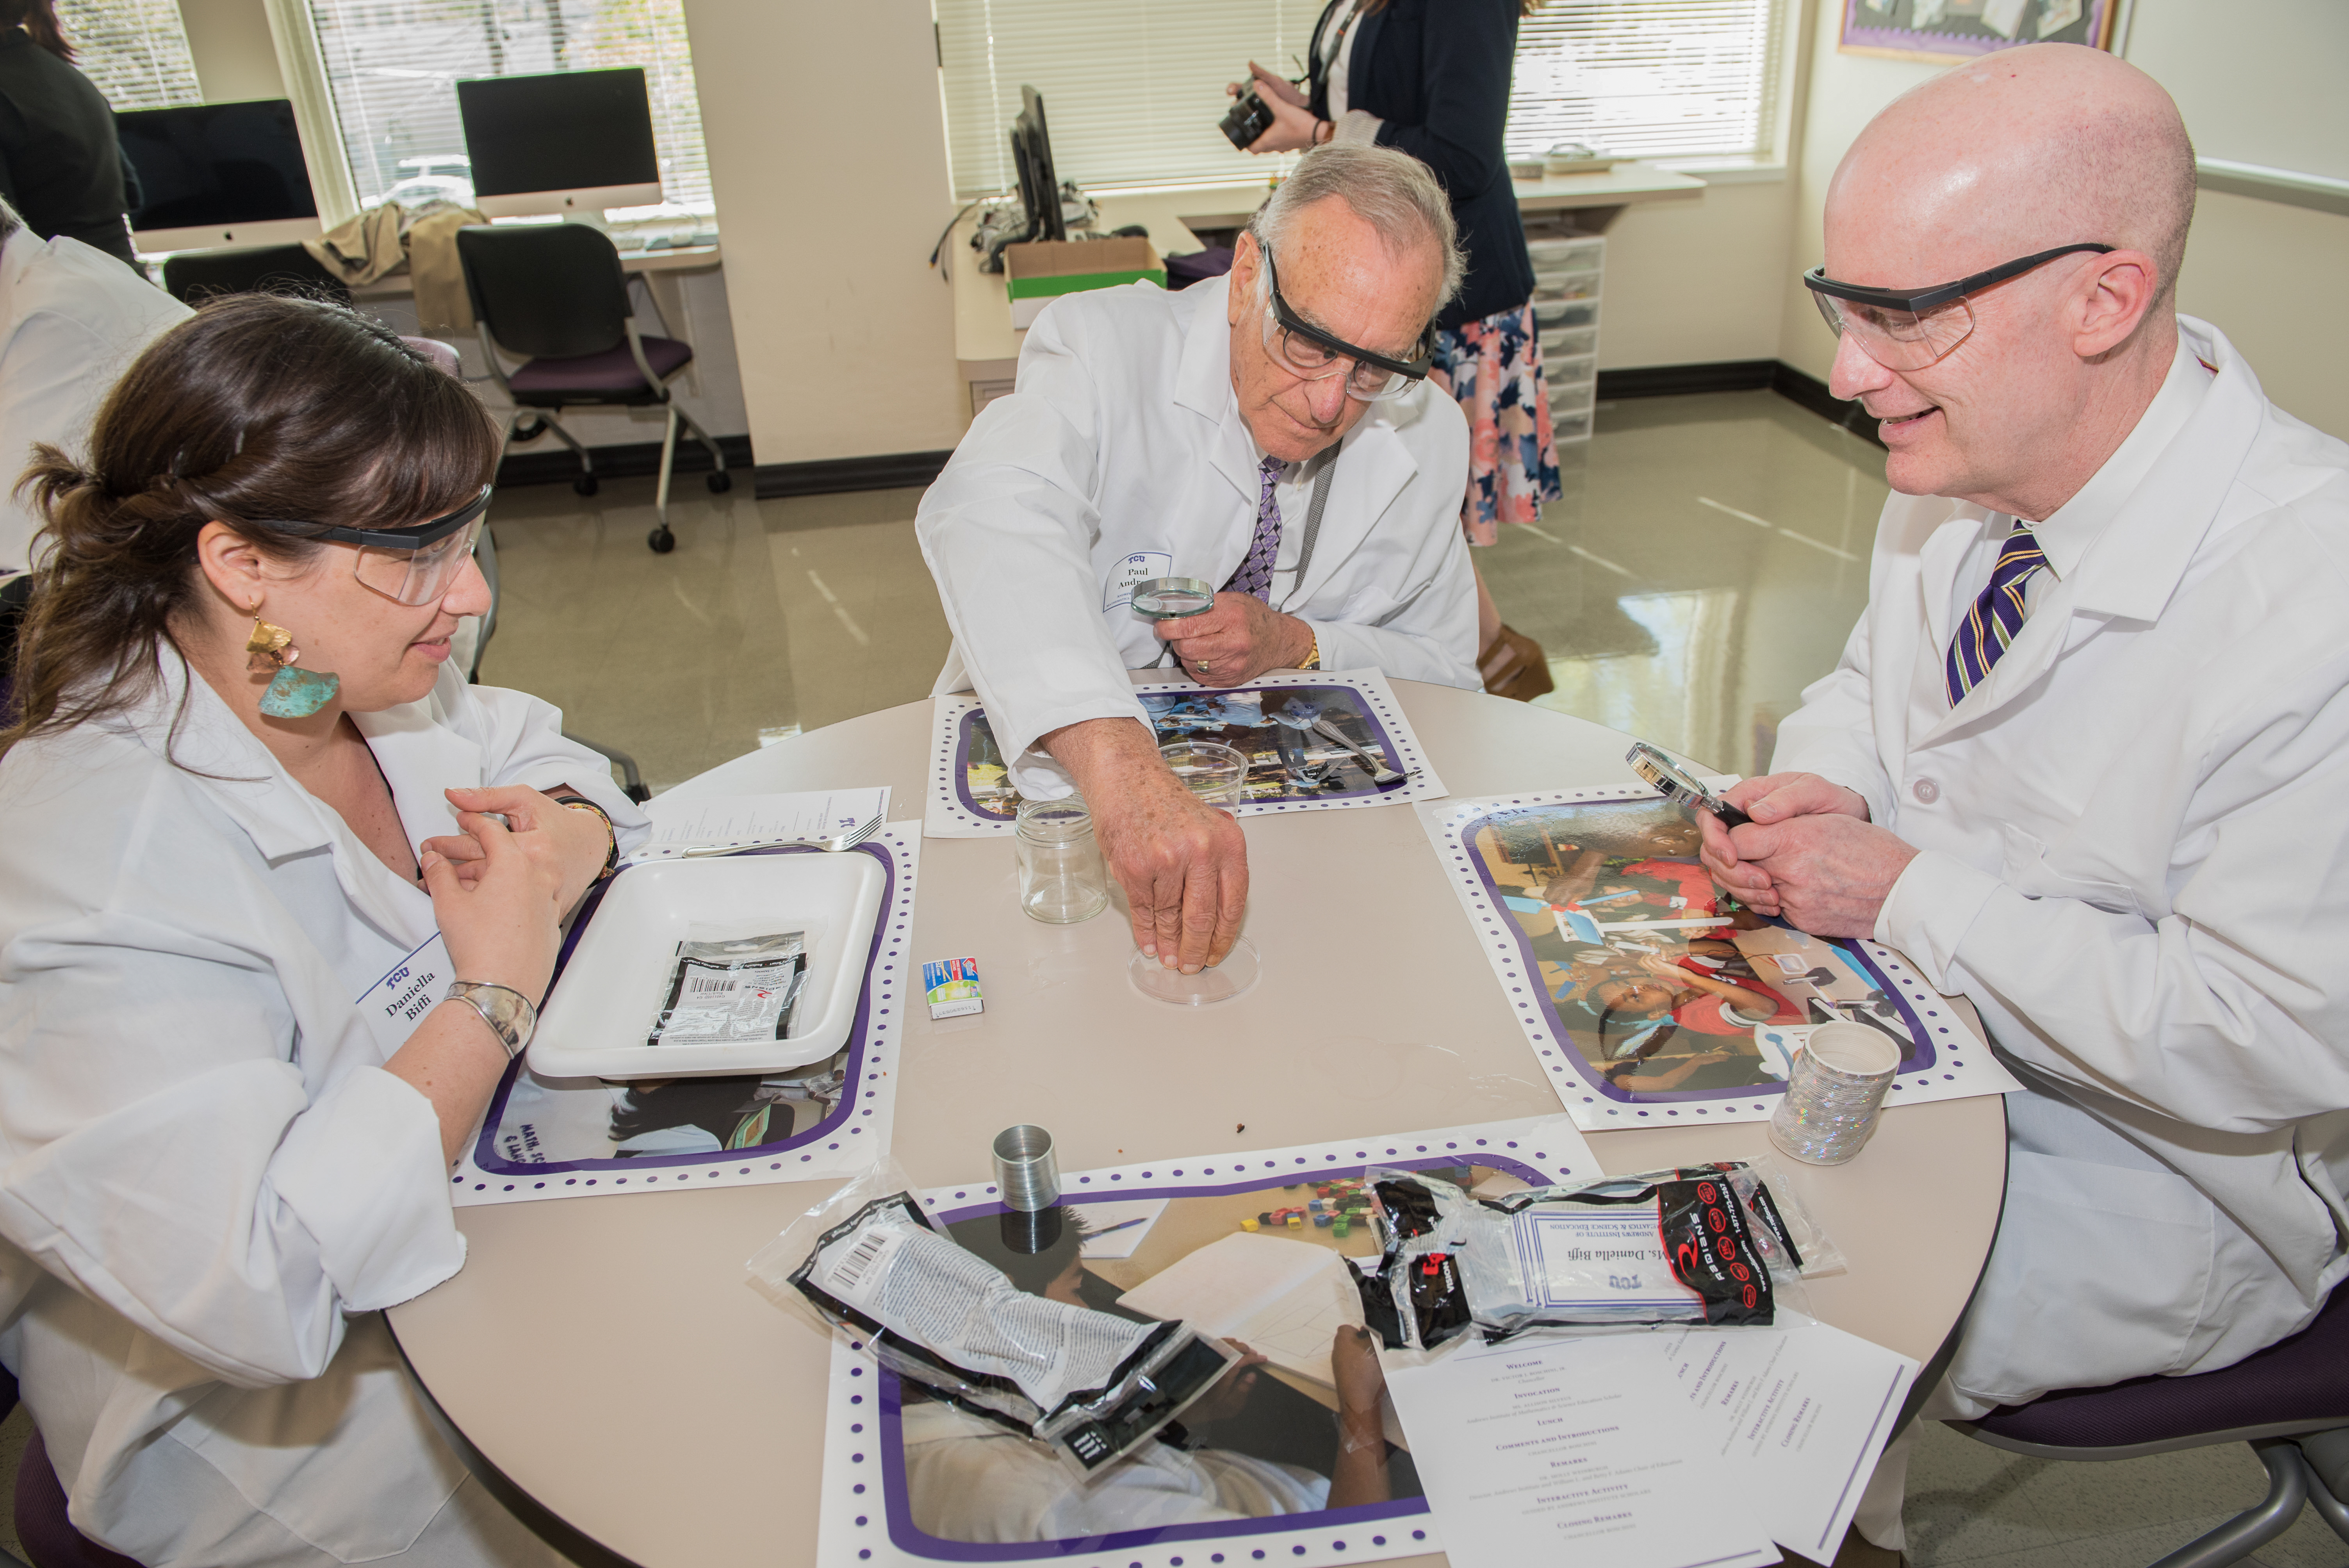 Chancellor Boschini, Paul Andrews, and a woman wearing white lab coats playing with math/science curriculum. 